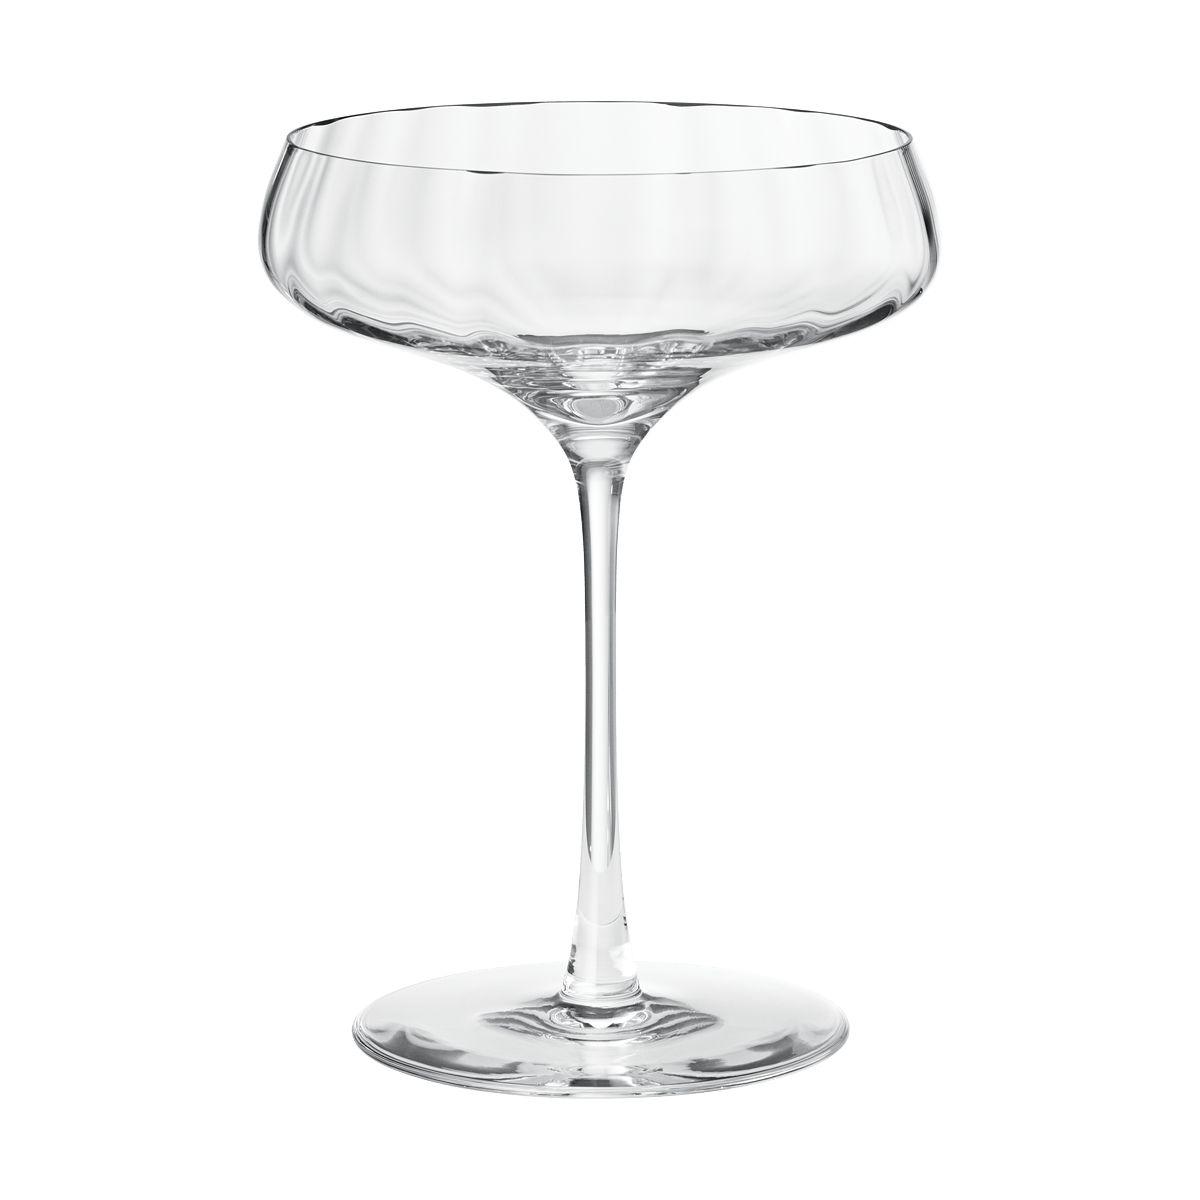 https://res.cloudinary.com/georgjensen/image/upload/f_auto,dpr_2/w_auto,c_scale/products/images/hi-res/10019696_BERNADOTTE_COCKTAIL_COUPE_GLASS_CRYSTALLINE_20CL_2PCS_01?_i=AG